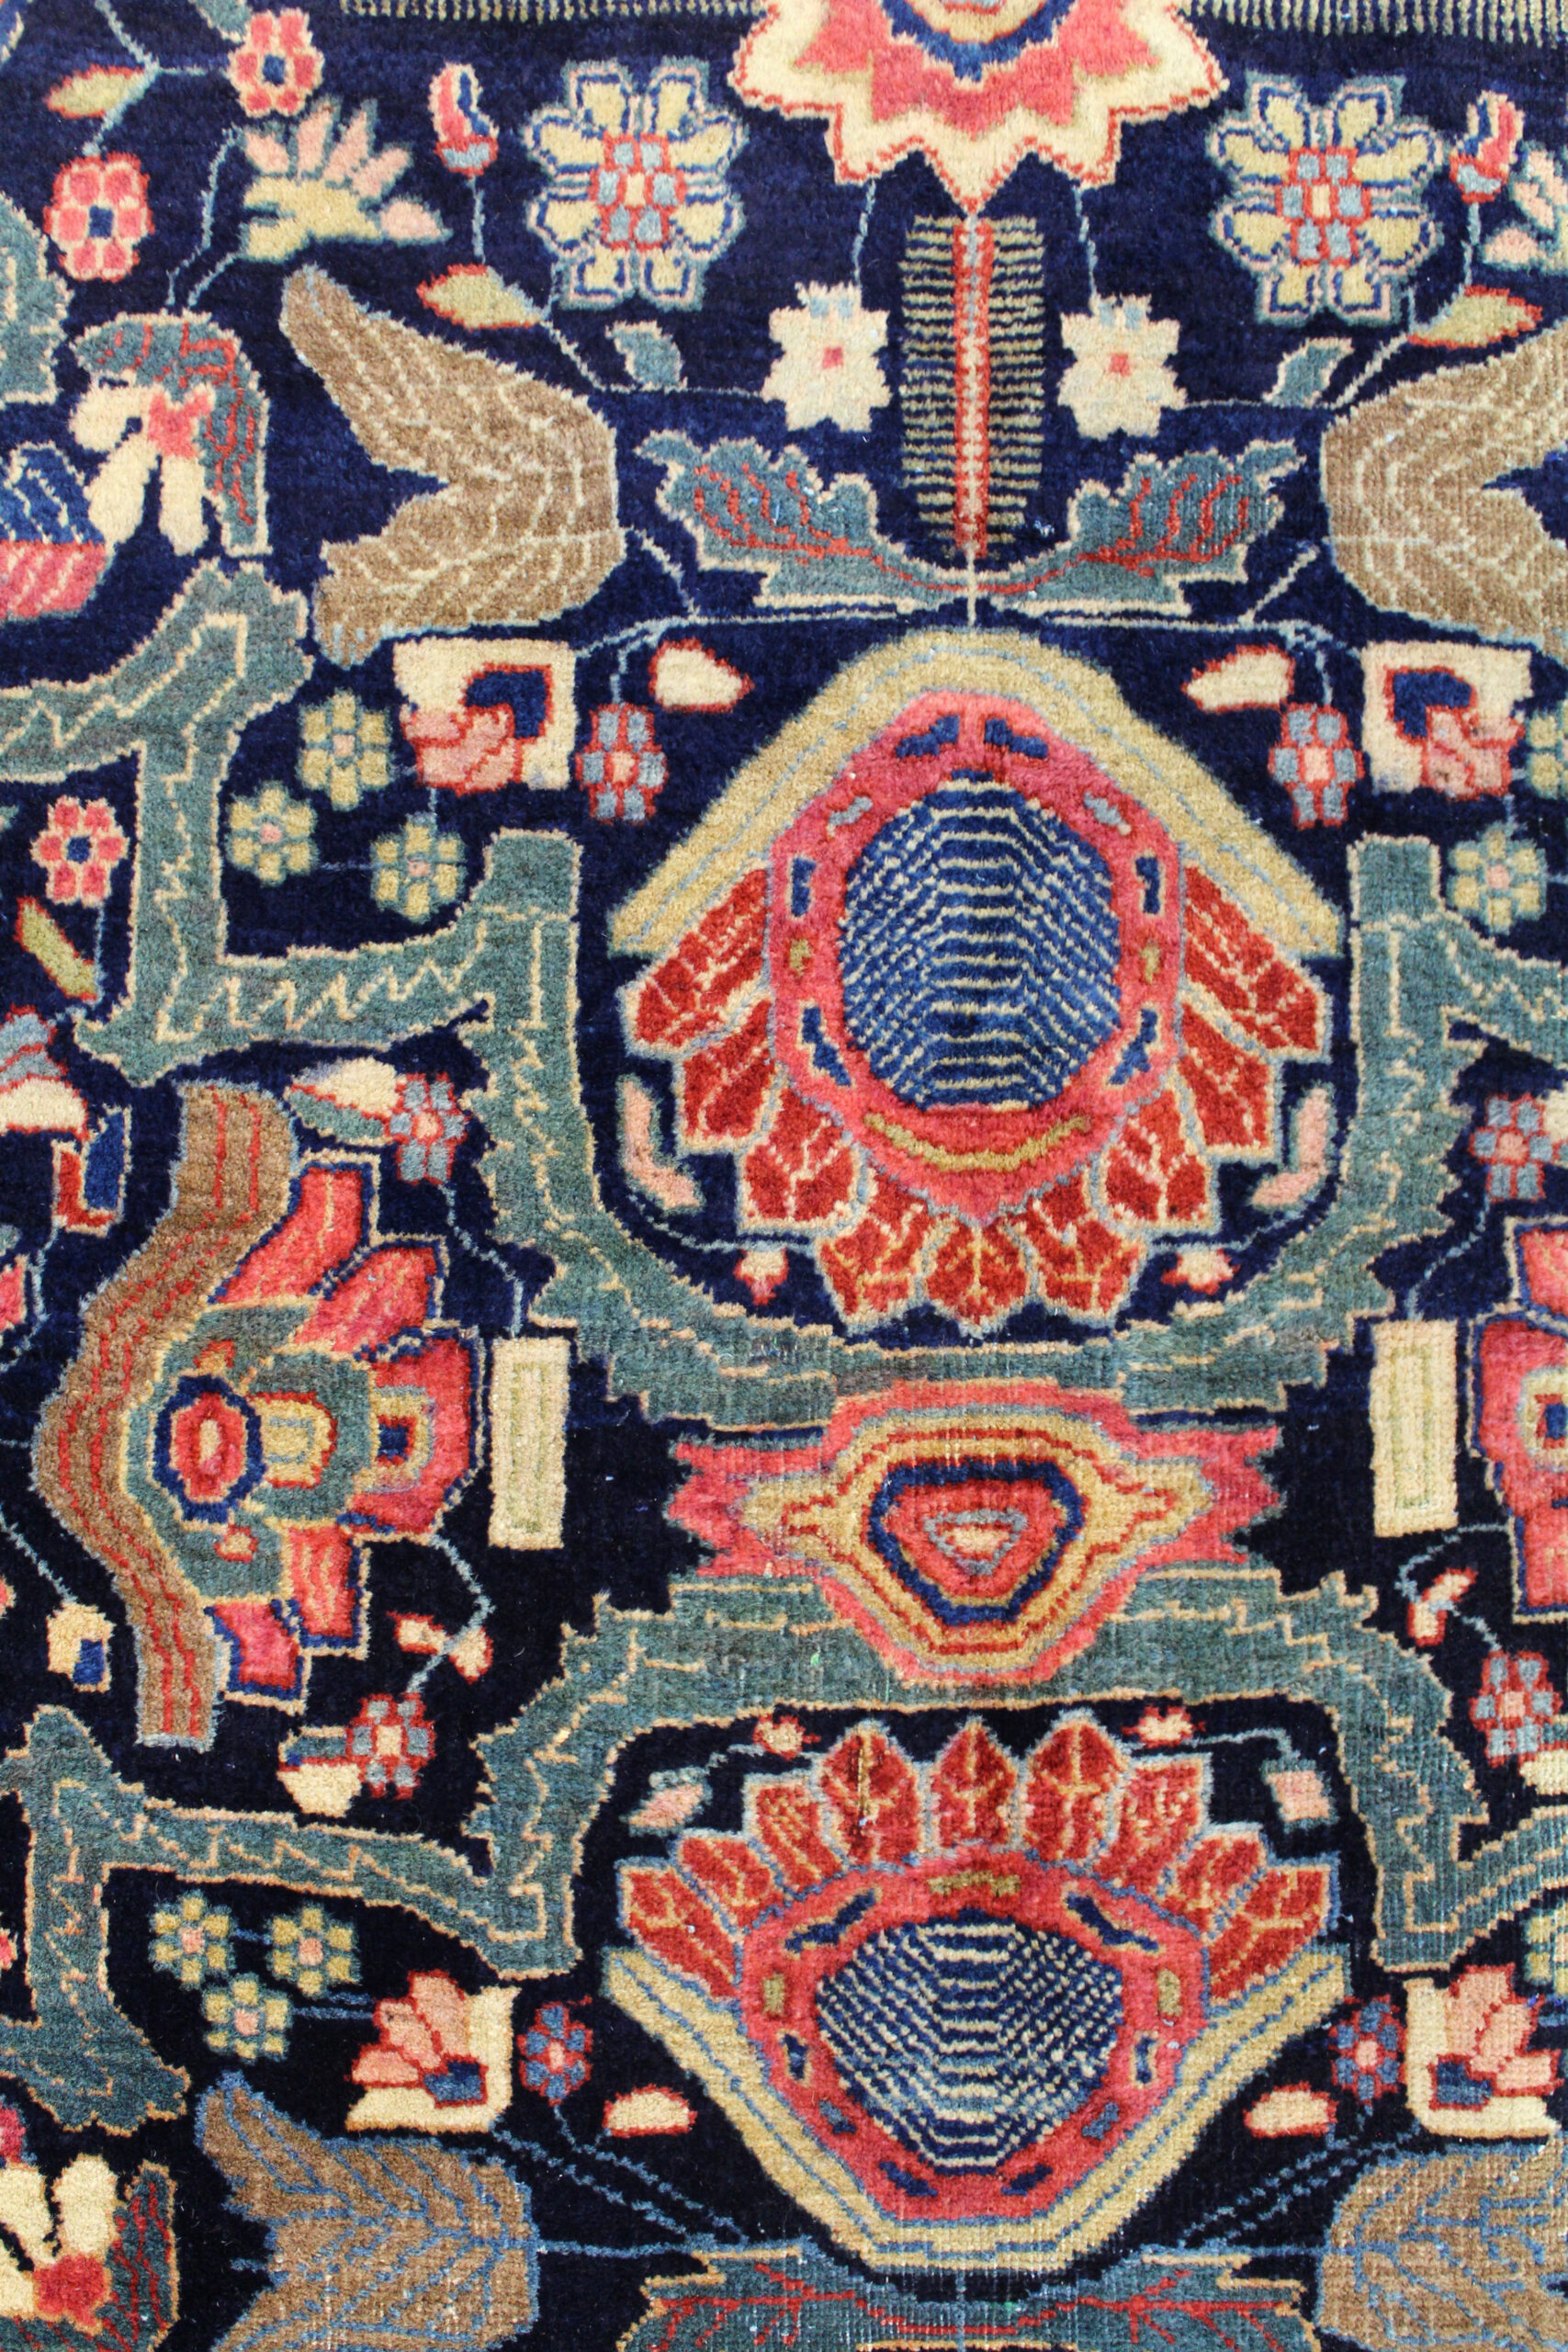 detail of stylized flowers and strapwork from an antique Persian Fereghan Sarouk carpet